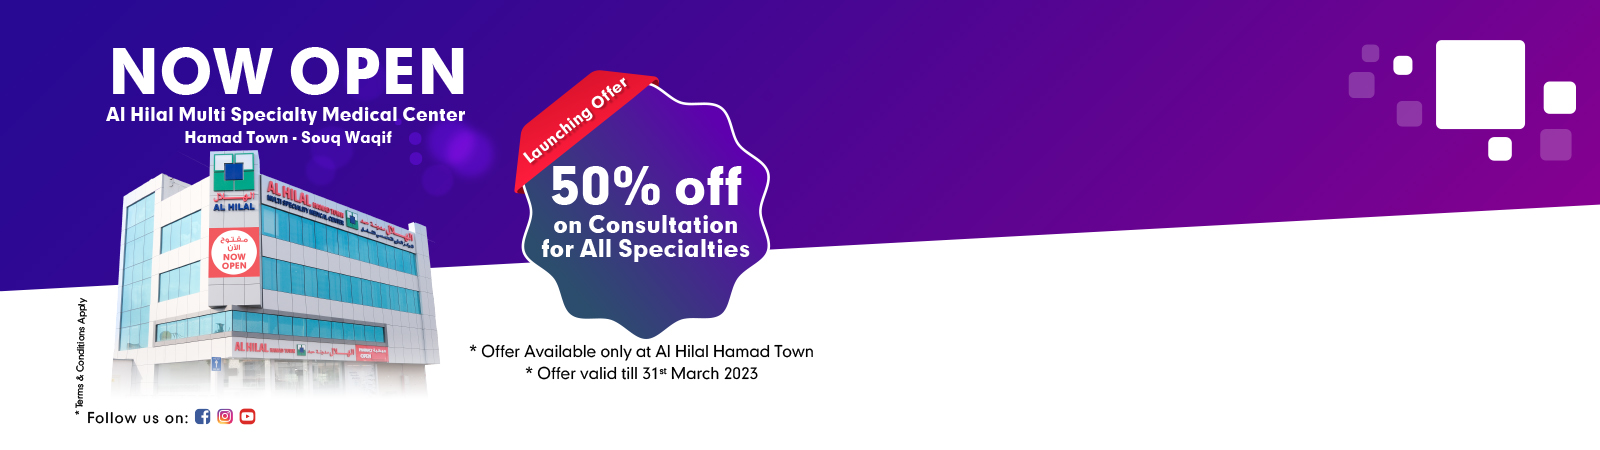 ALH-Website-Banner-ALH-HT-Launching-Offer-50-Off-on-Consultation-1600-x-450